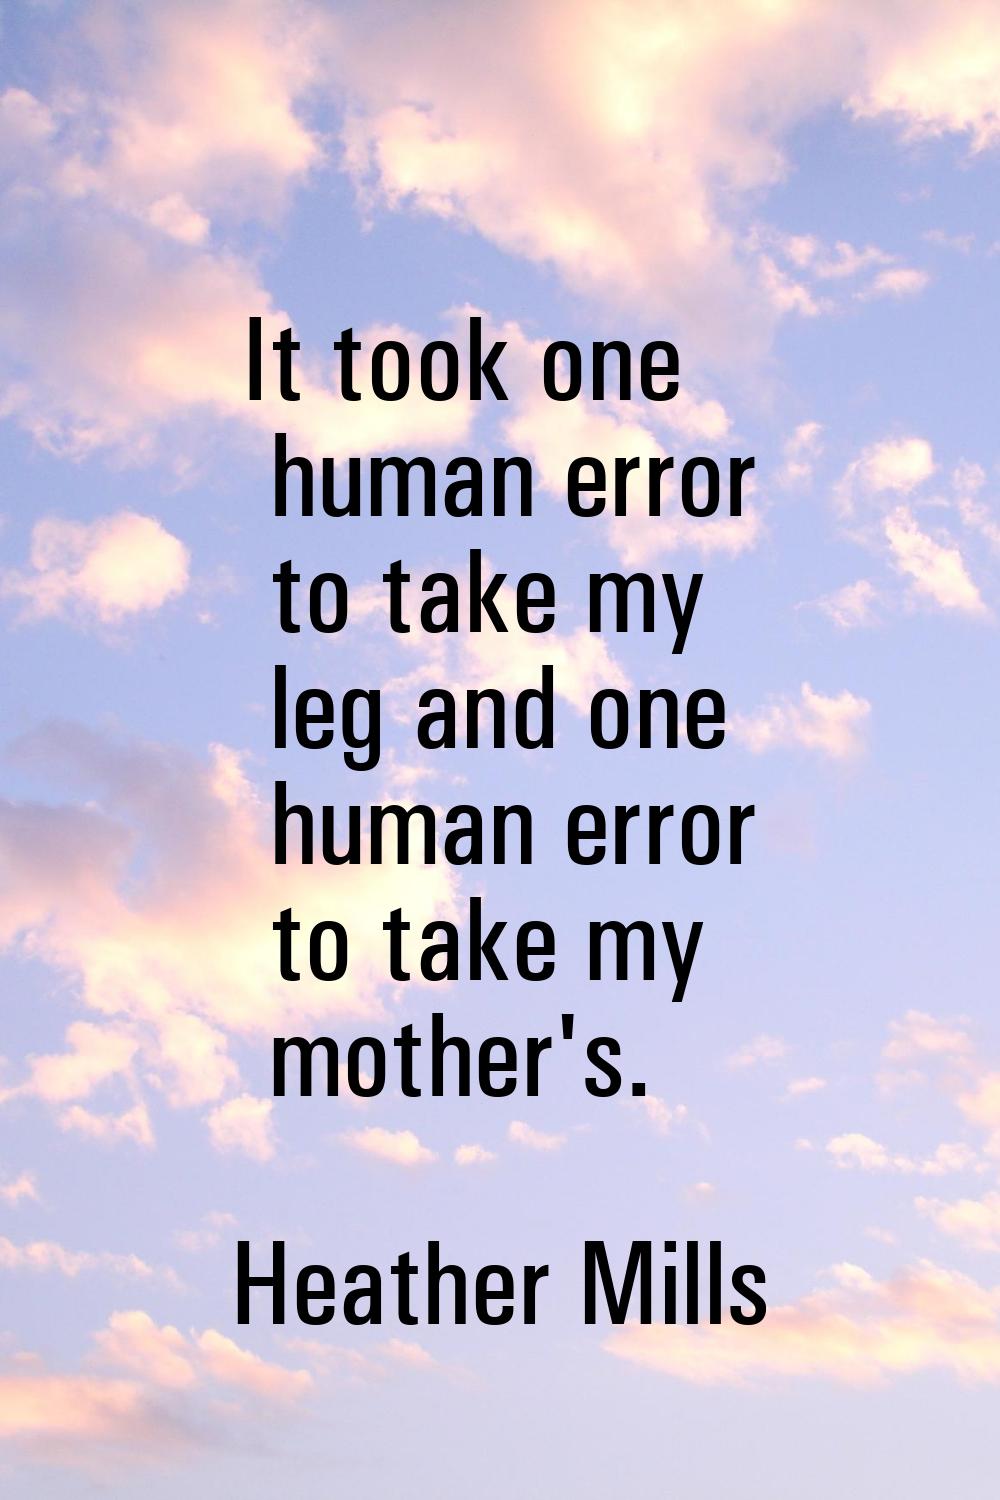 It took one human error to take my leg and one human error to take my mother's.